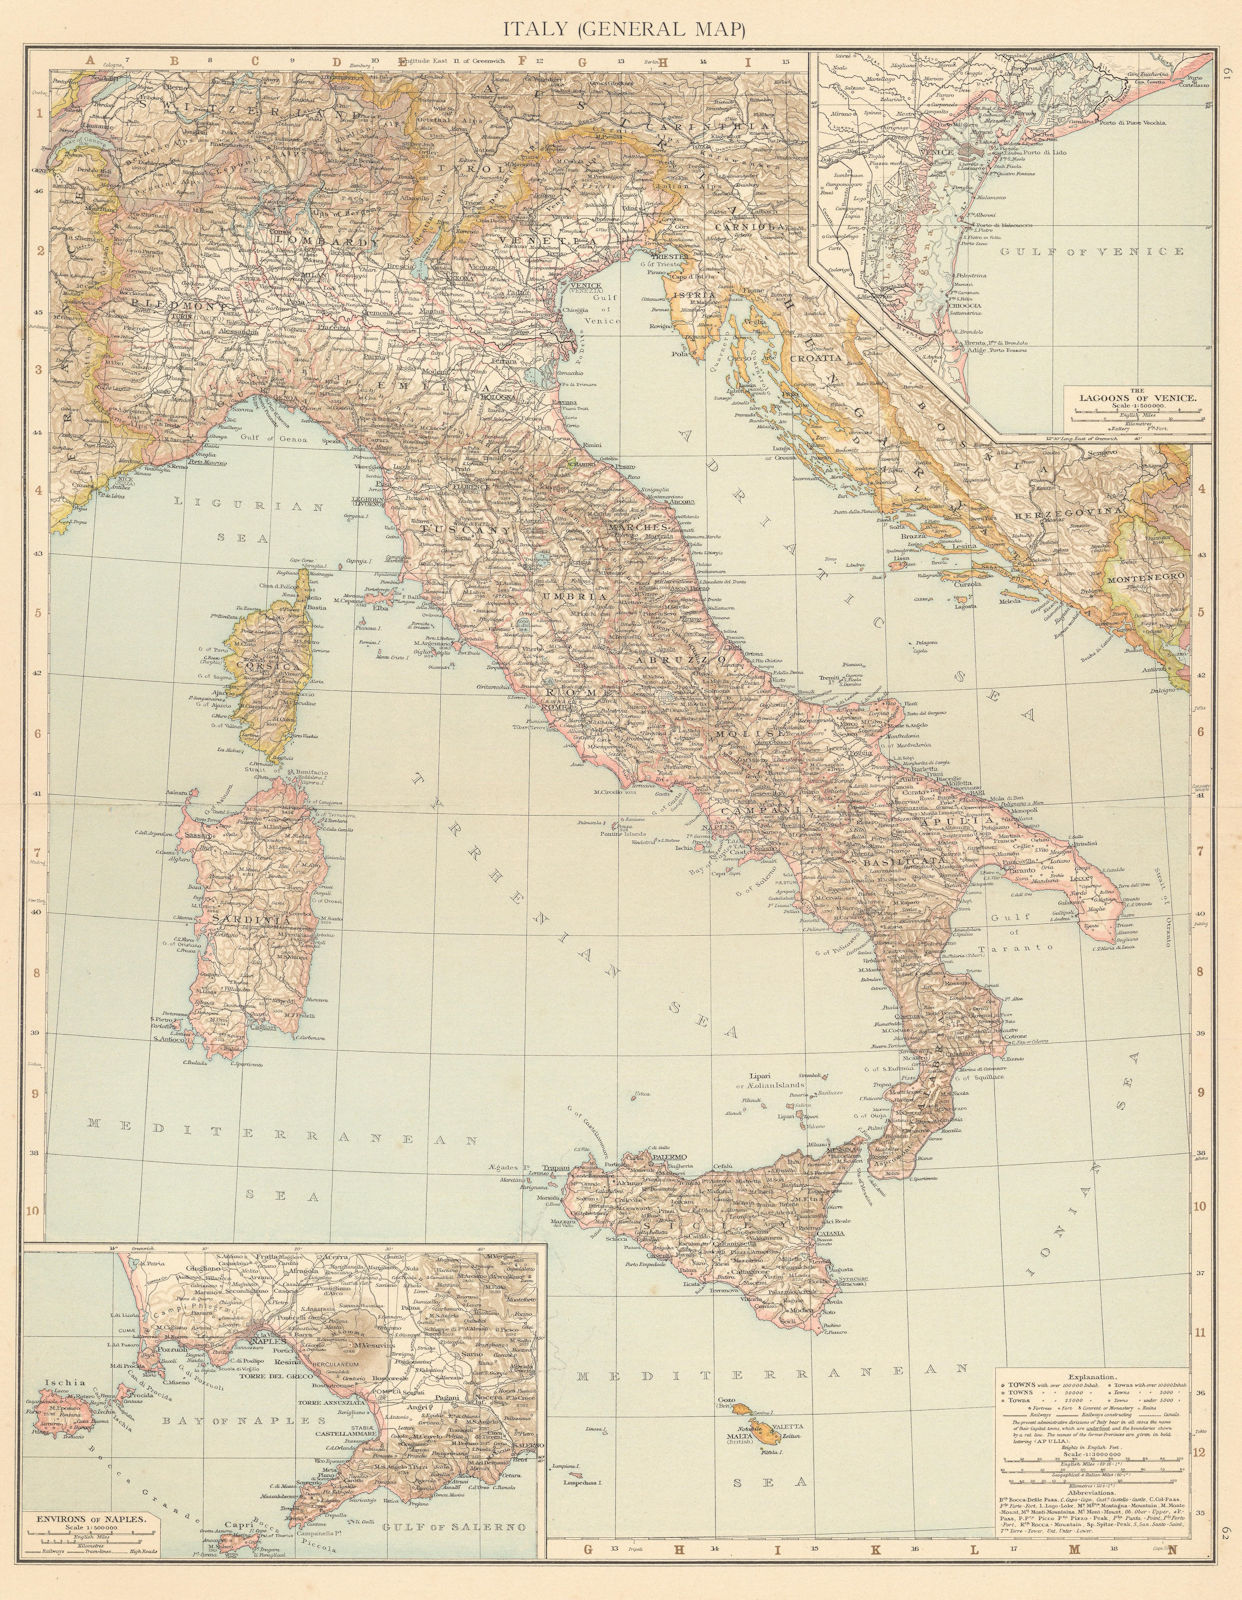 Italy (general map). Lagoons of Venice. Environs of Naples. THE TIMES 1895